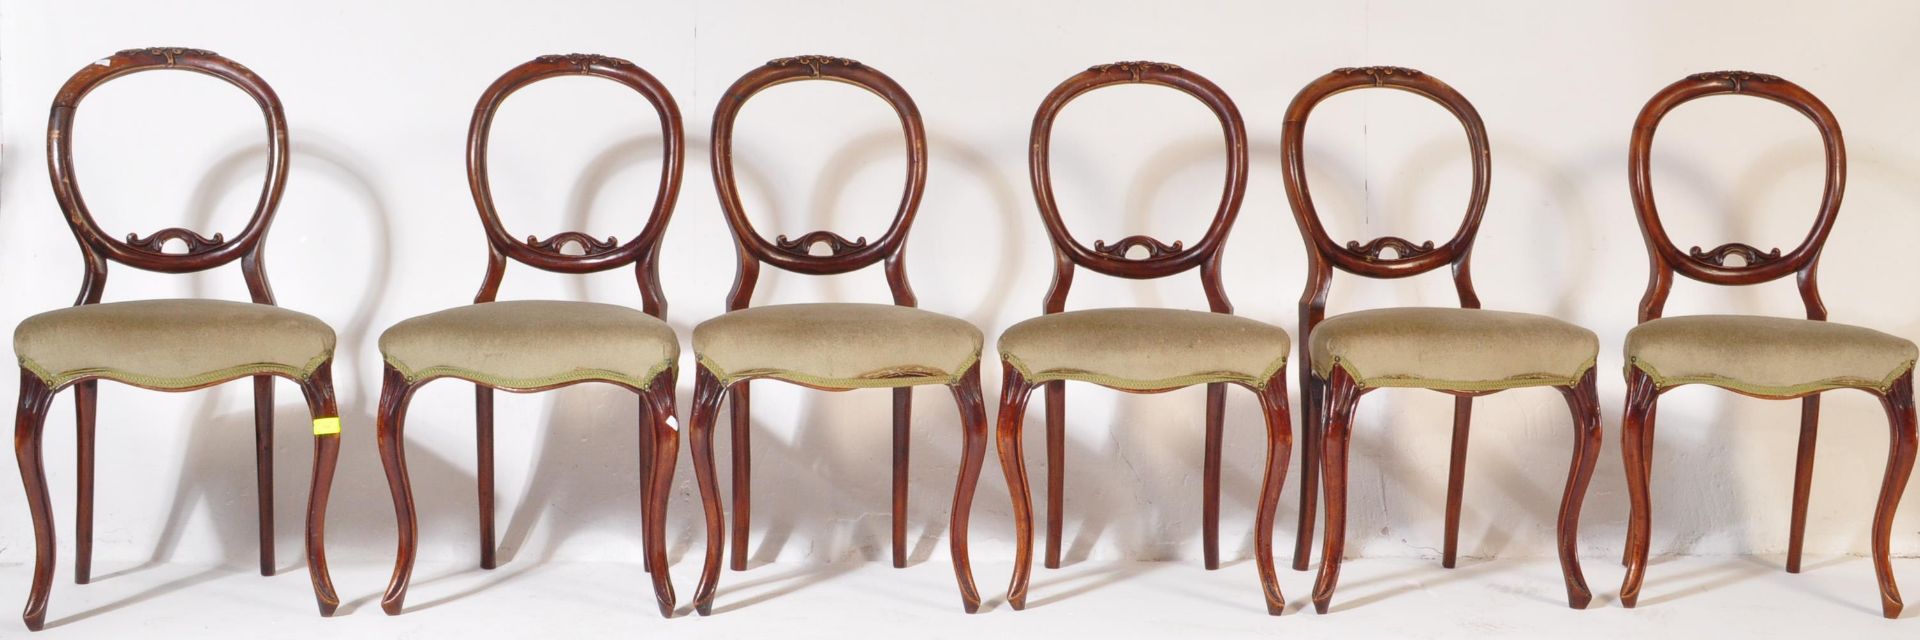 SET OF SIX VICTORIAN 19TH CENTURY BALLOON BACK CHAIRS